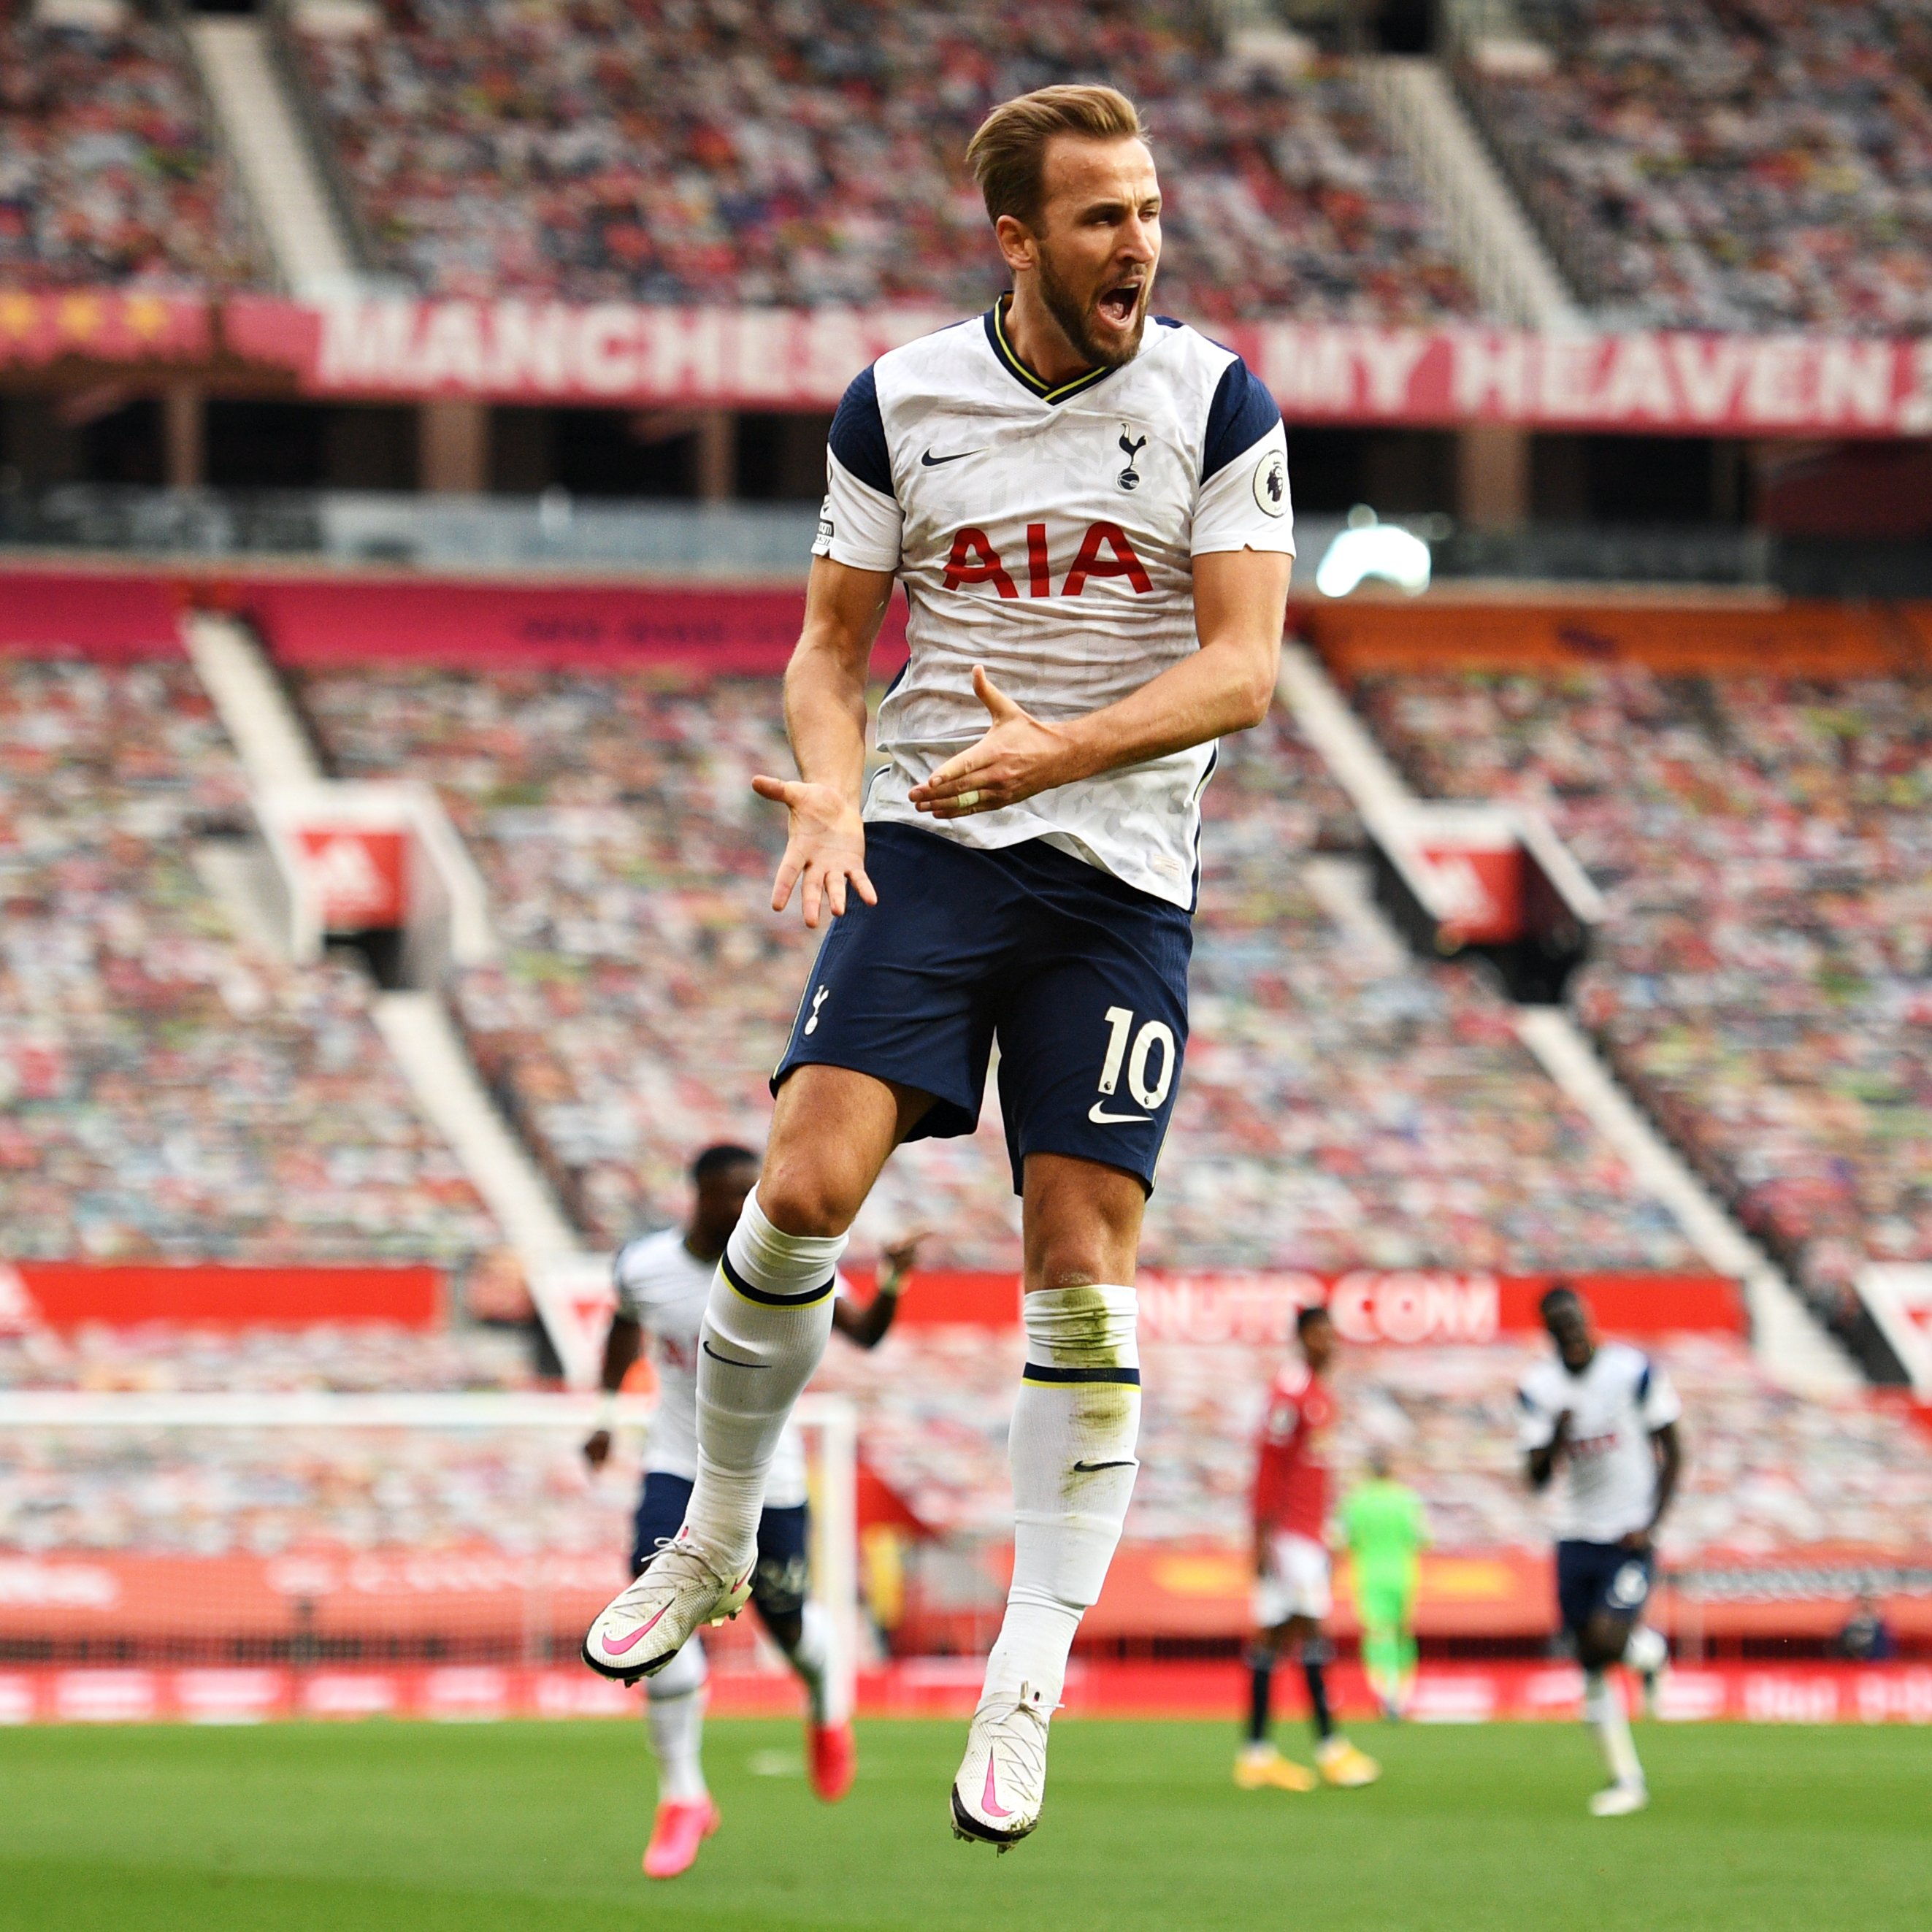 Harry Kane FPL Forward to consider for the remainder of the season 